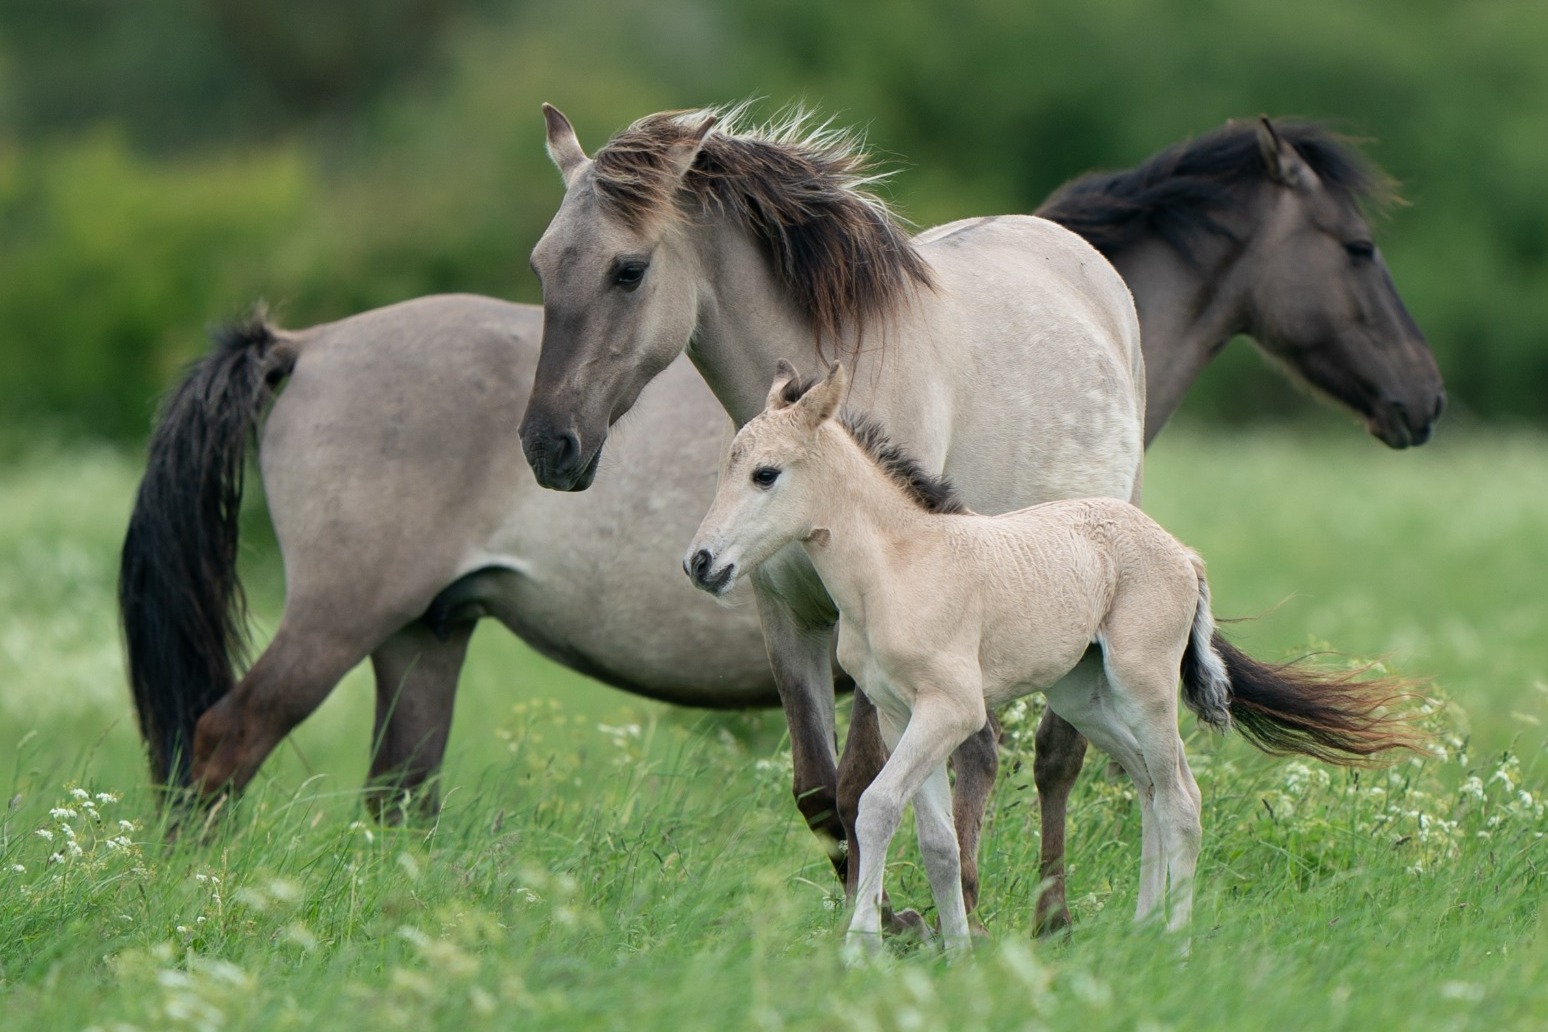 Konik foals and Highland calves brought in to help manage nature reserve 